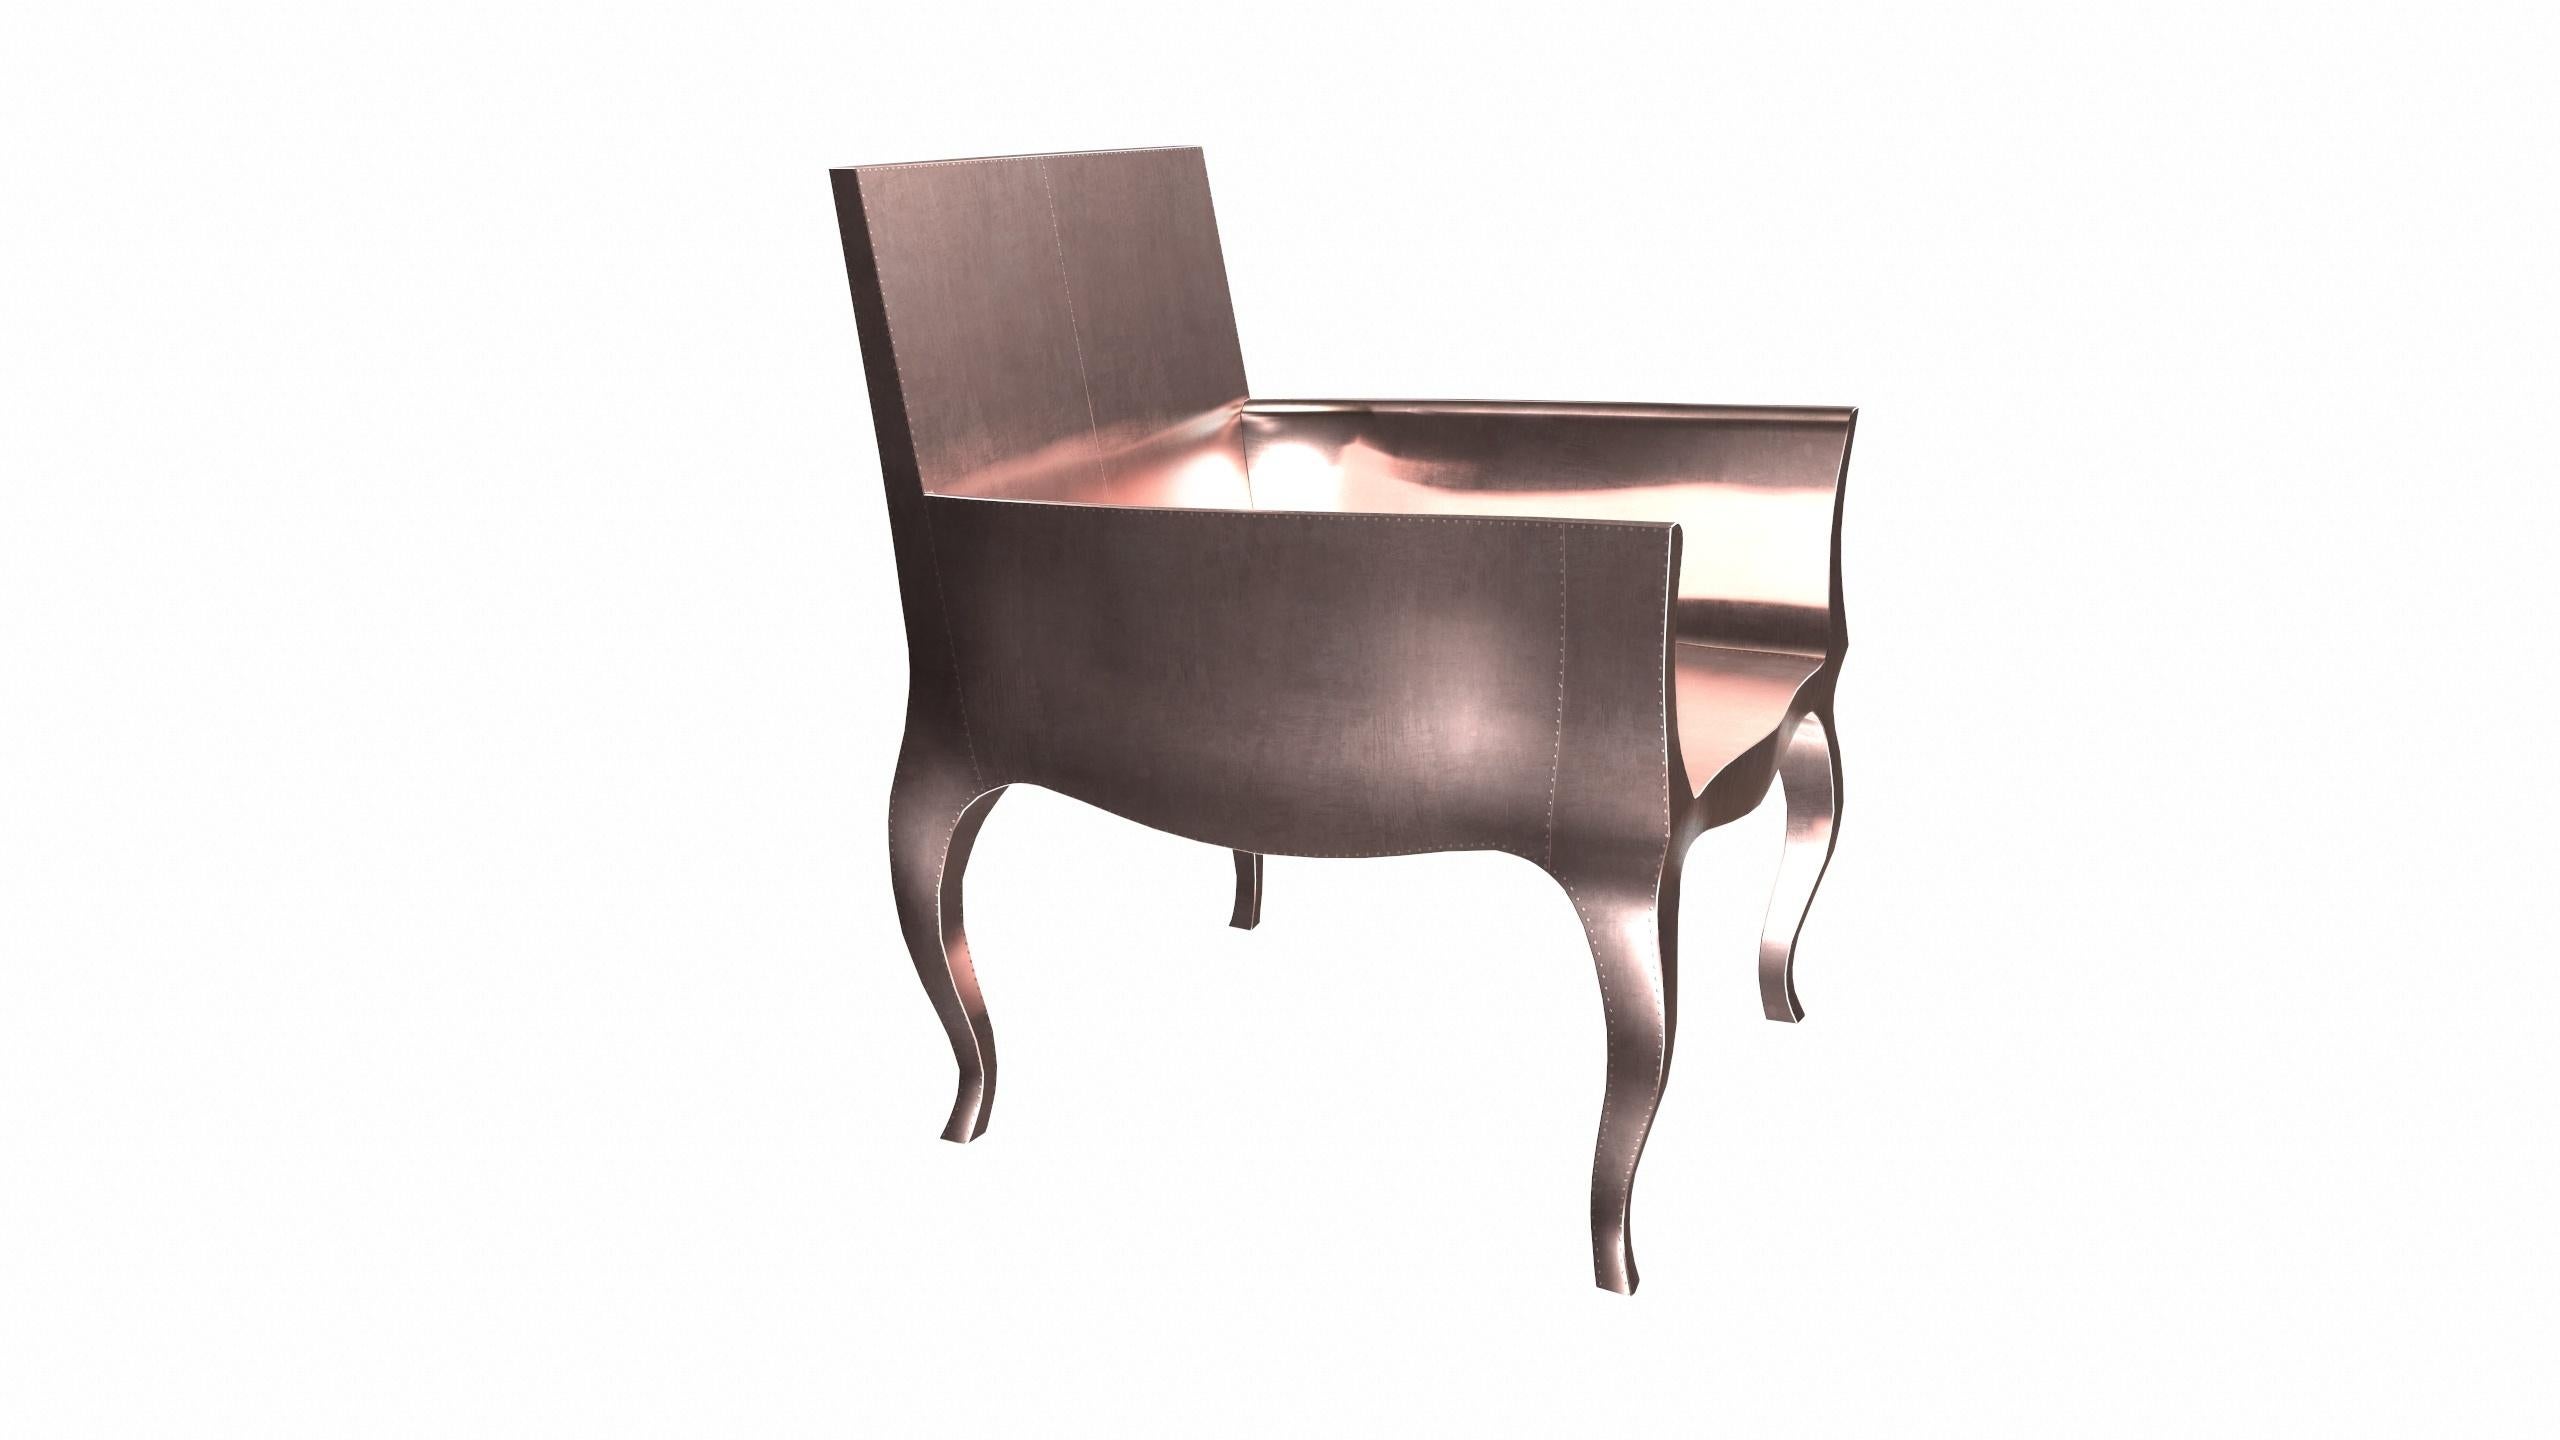 Hand-Carved Art Deco Desk Chair in Smooth Copper by Paul Mathieu for S. Odegard For Sale